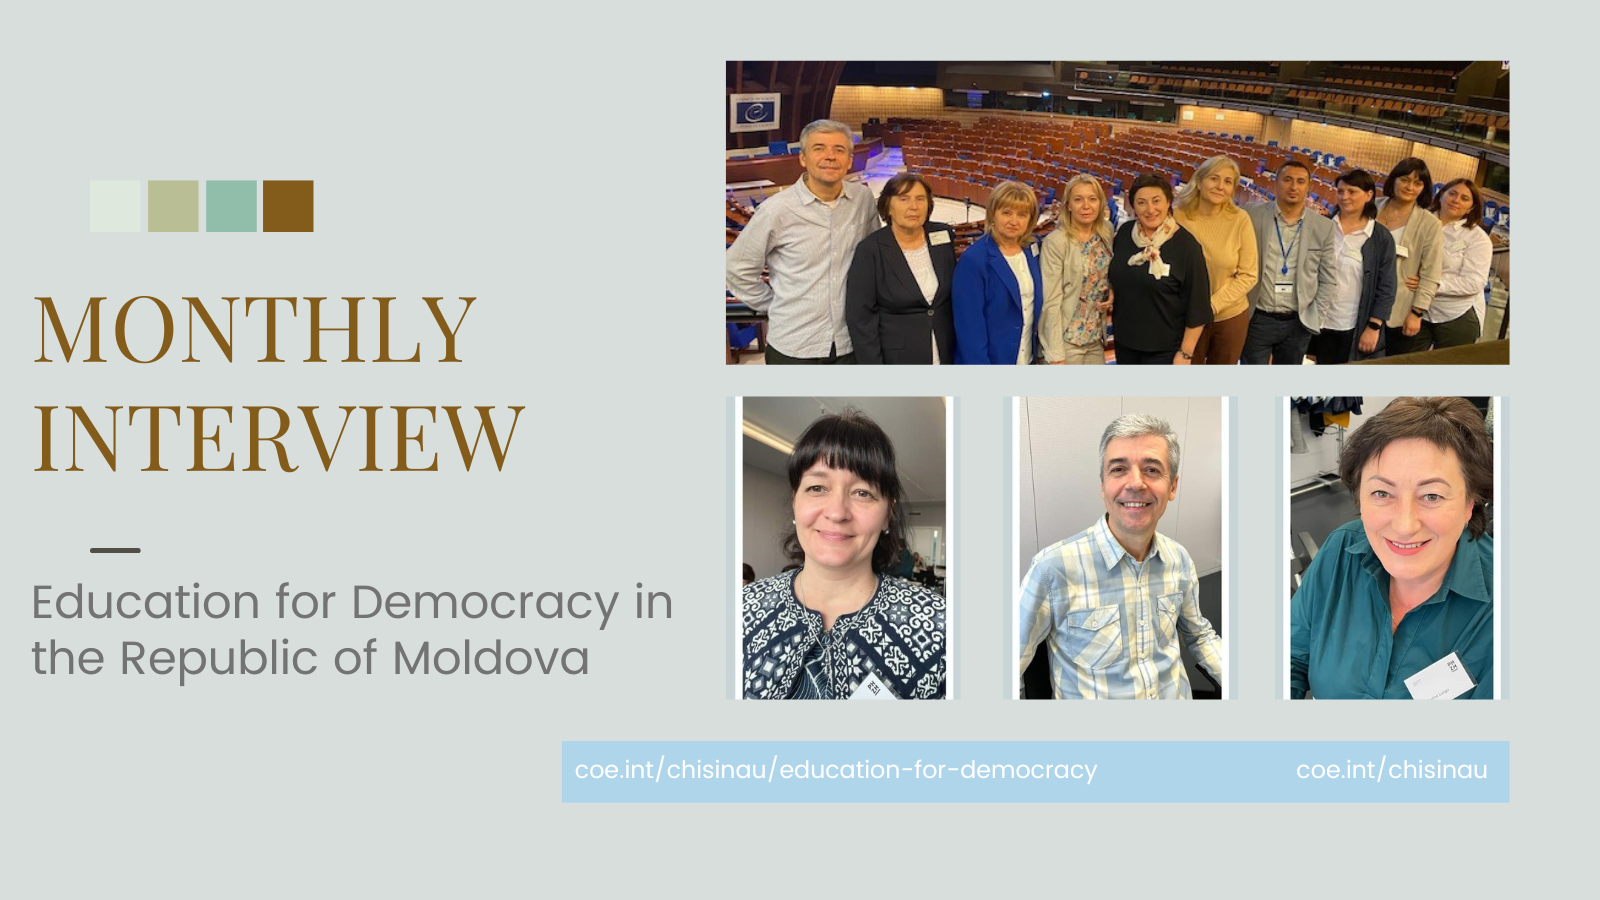 November interview: Developing competences for democratic culture in school. Progress and challenges